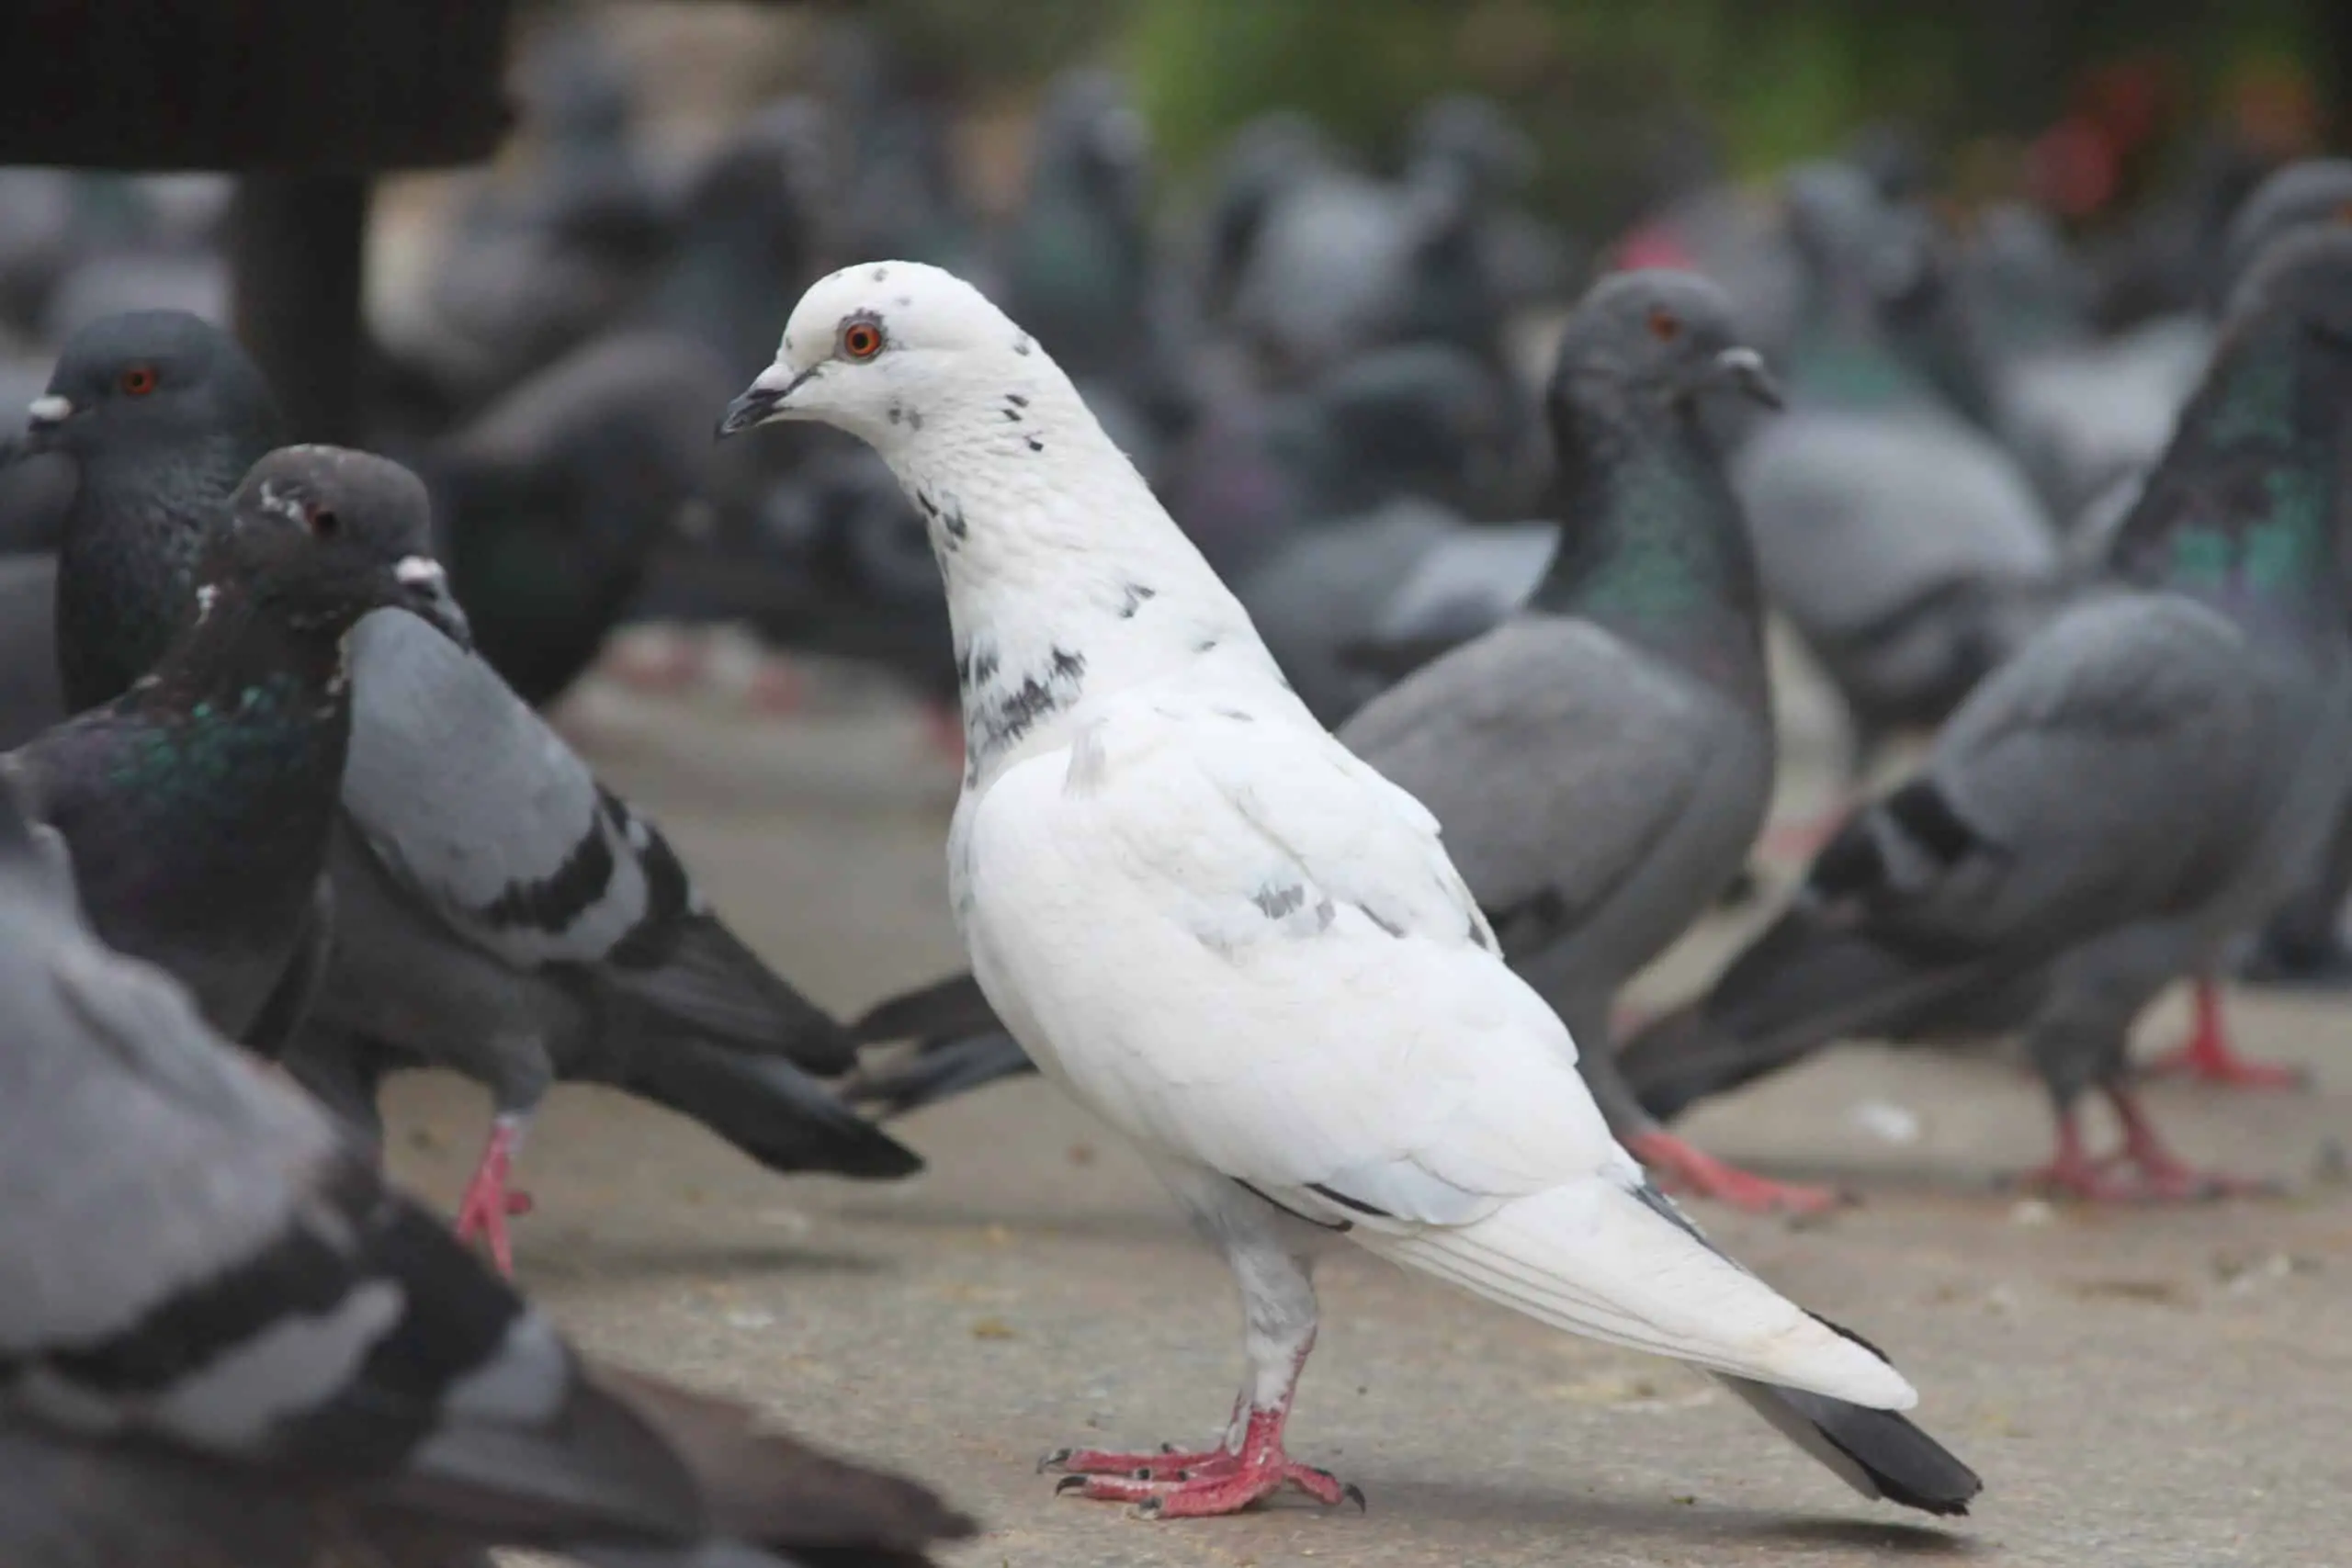 Black and White Pigeon Breeds